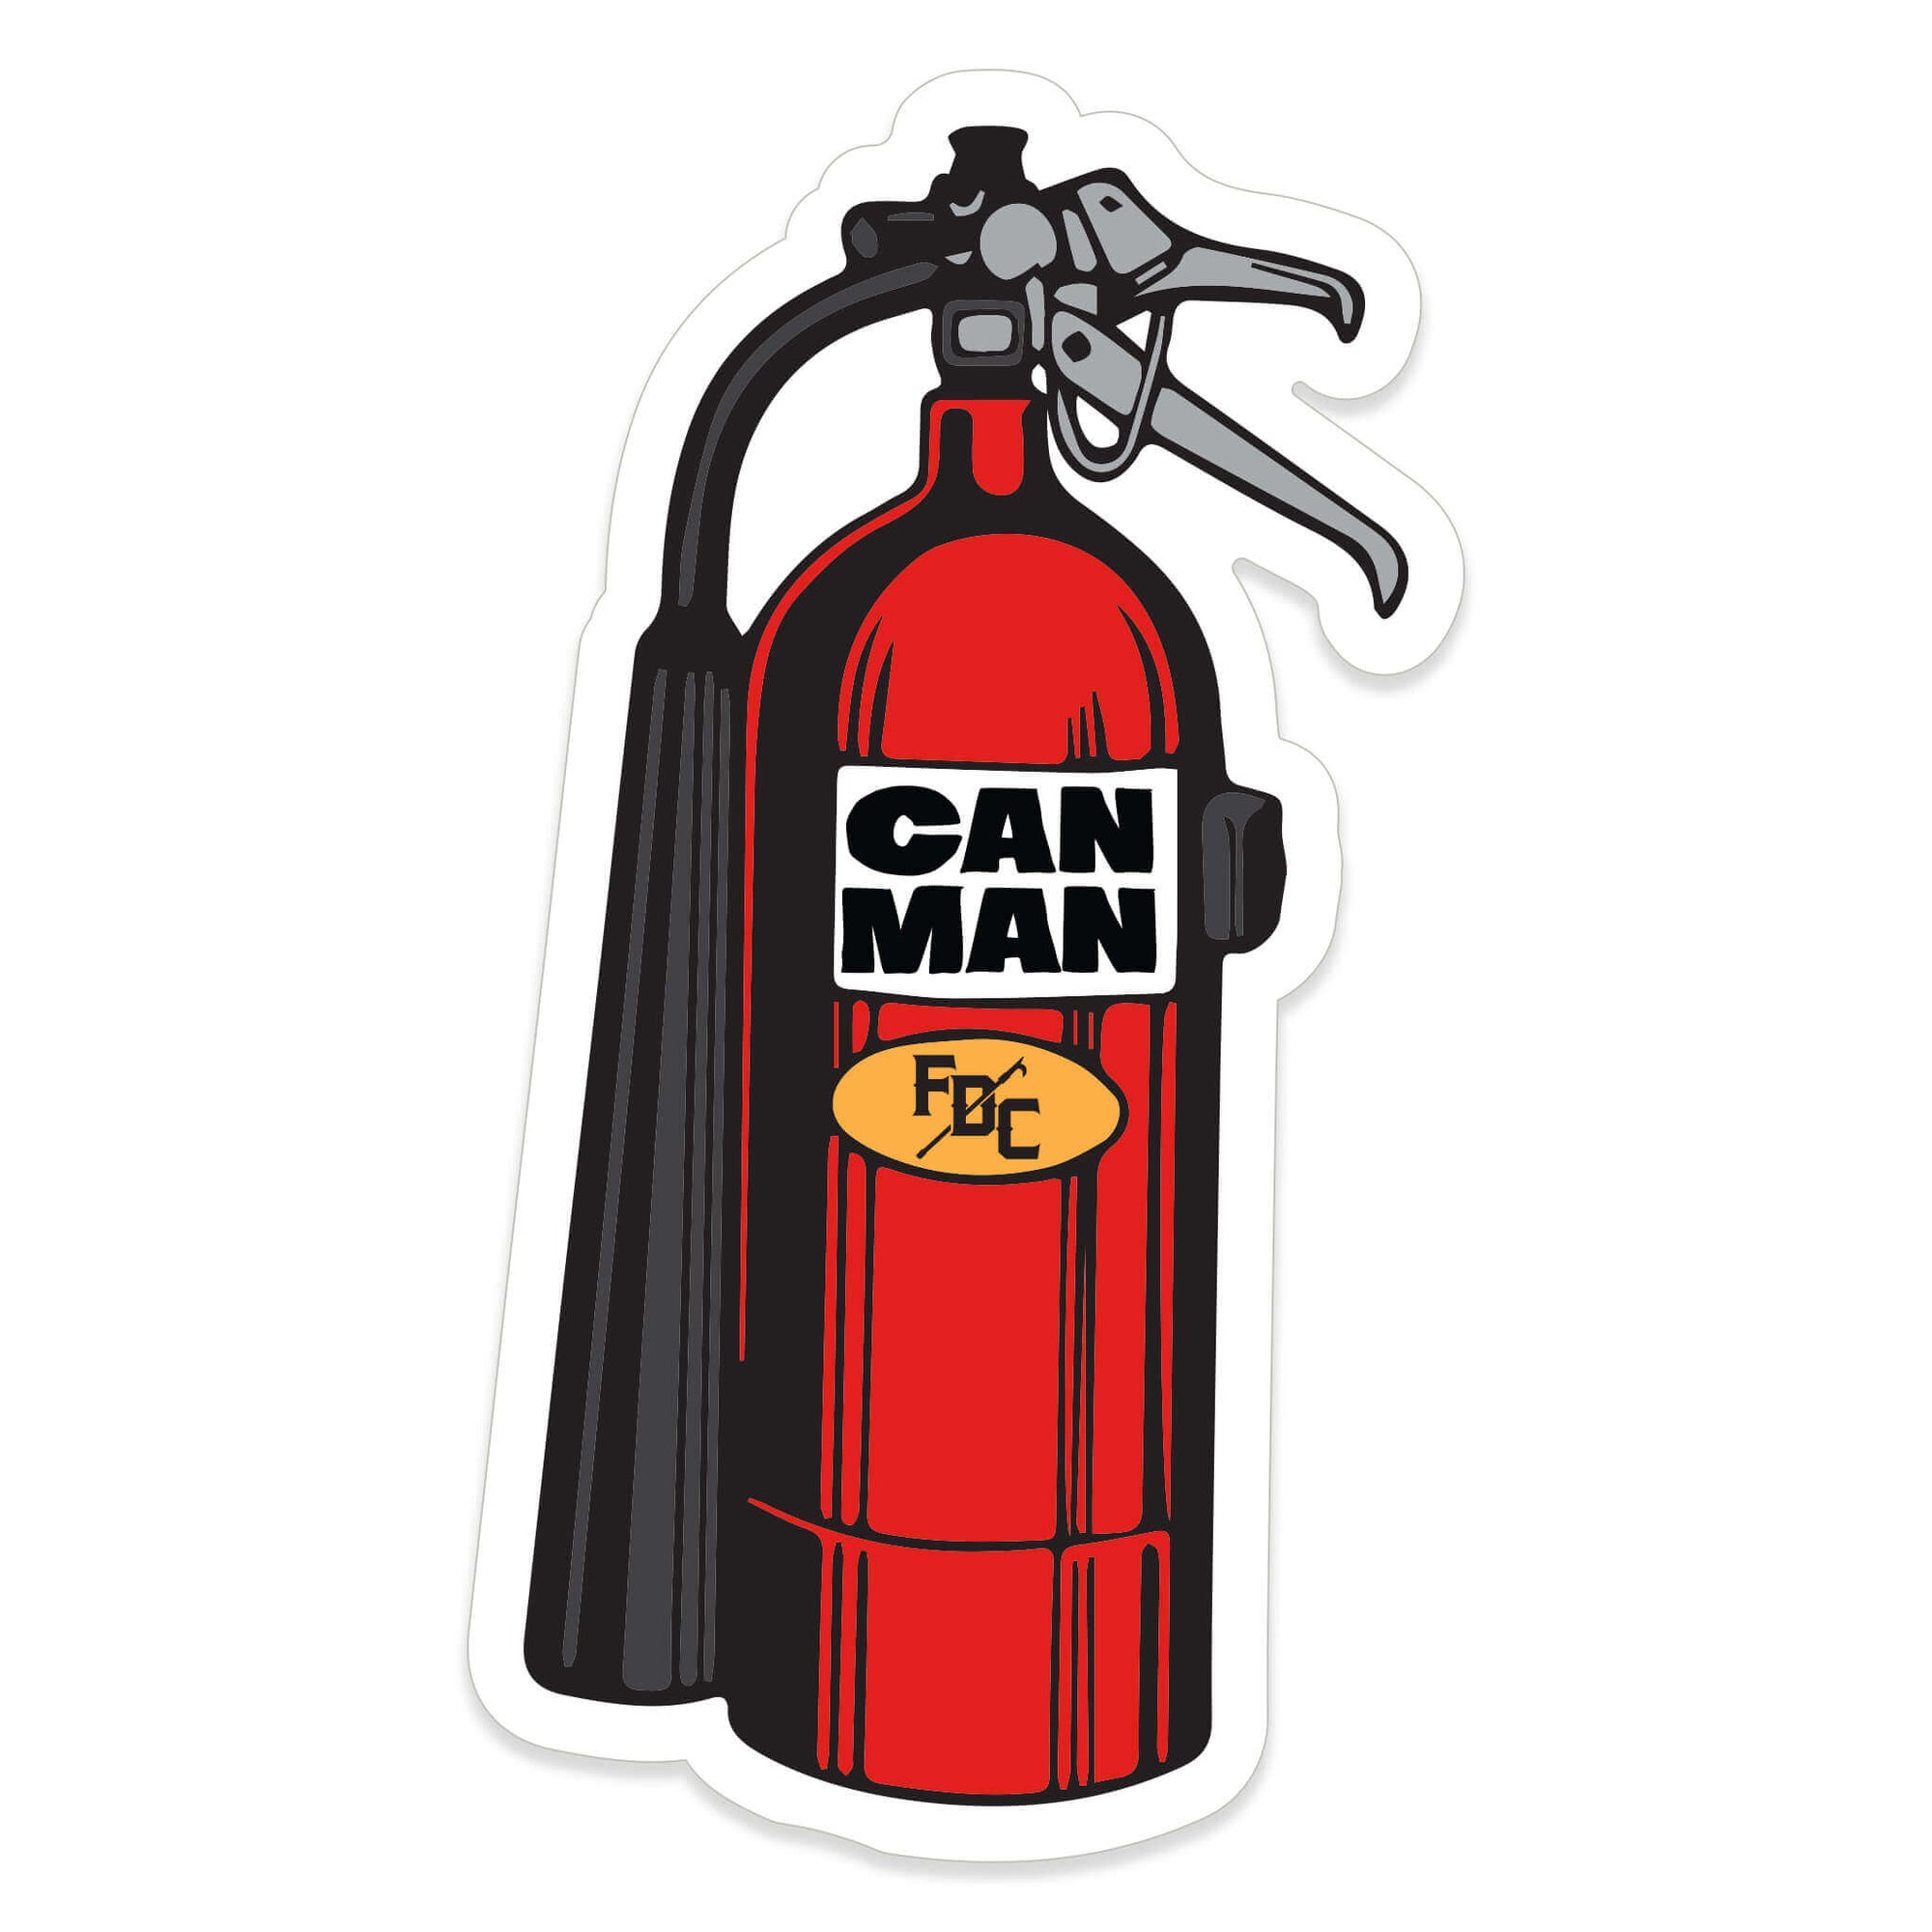 Red fire extinguisher with "can man" on the front and the FDC Pike Pole logo below.